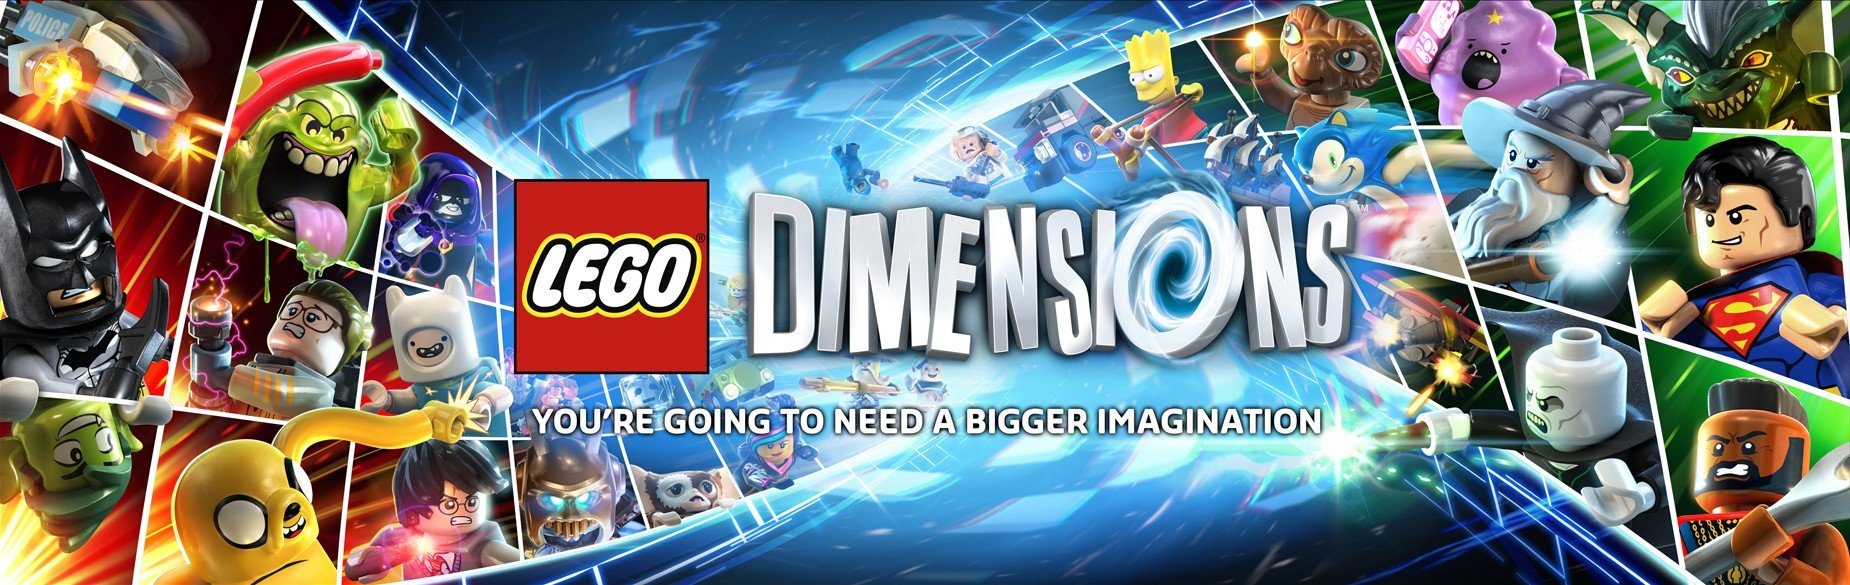 lego_dimensions_png_jpgcopy